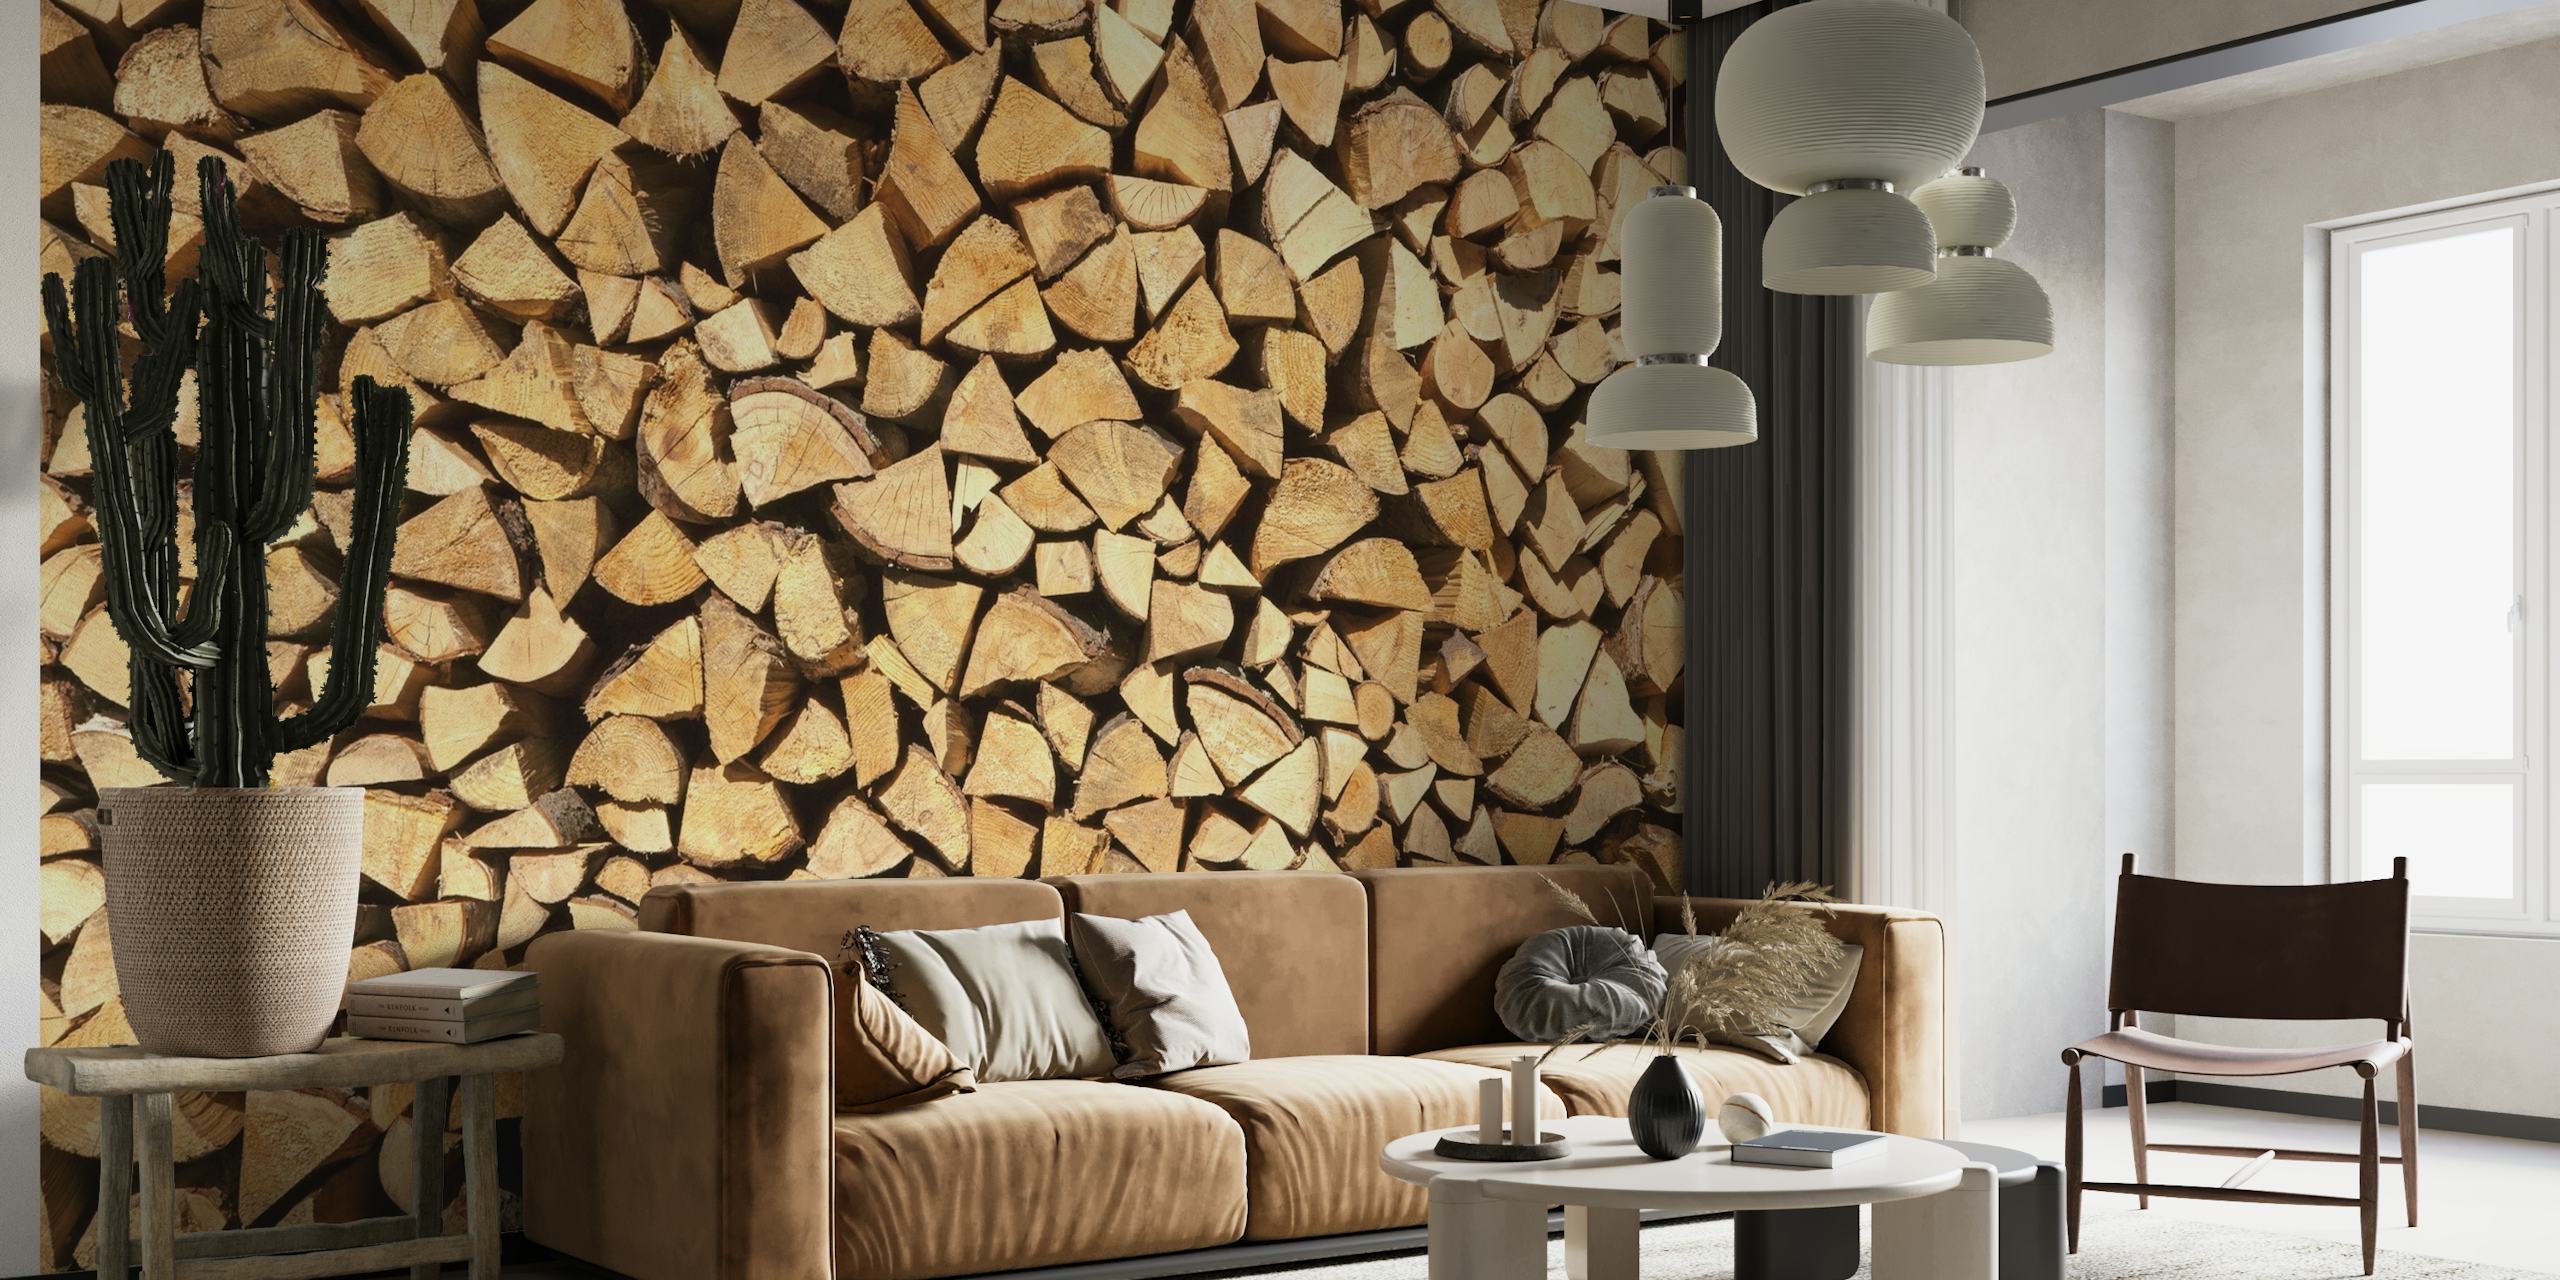 Realistic Wood Log Wallpaper featuring stacked logs in natural brown, cream, and rusty yellow tones